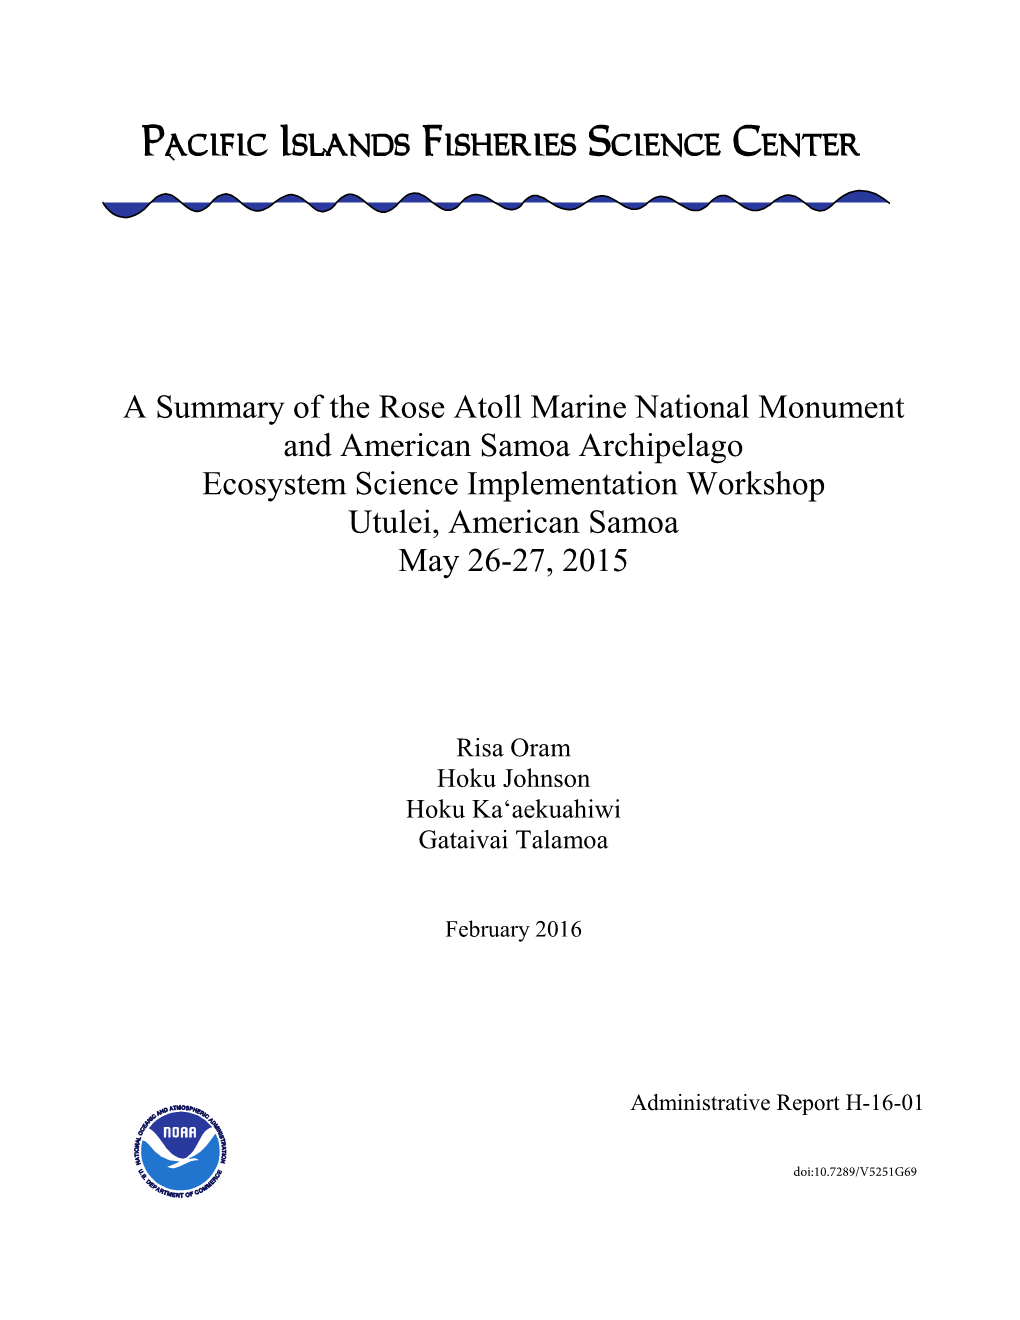 A Summary of the Rose Atoll Marine National Monument and American Samoa Archipelago Ecosystem Science Implementation Workshop Utulei, American Samoa May 26-27, 2015